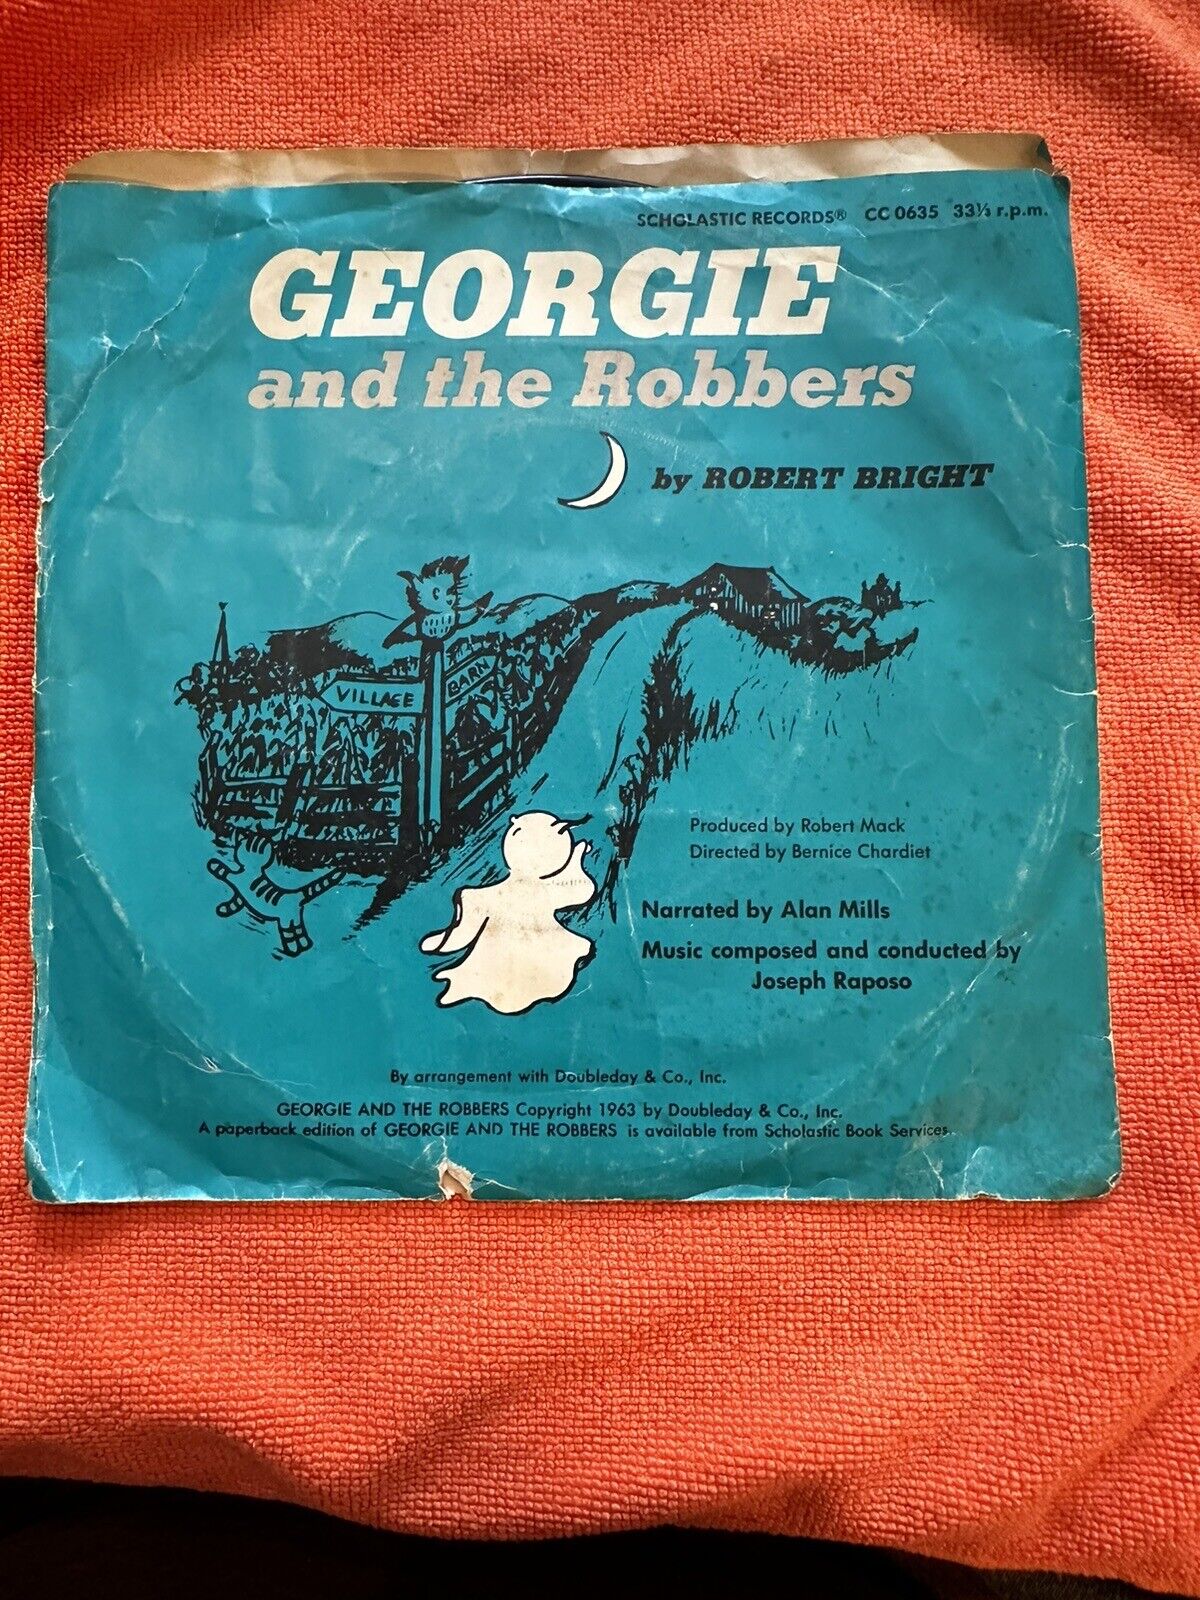 Vintage Scholastic Records 1969: Georgie And The Robbers: By Robert Bright